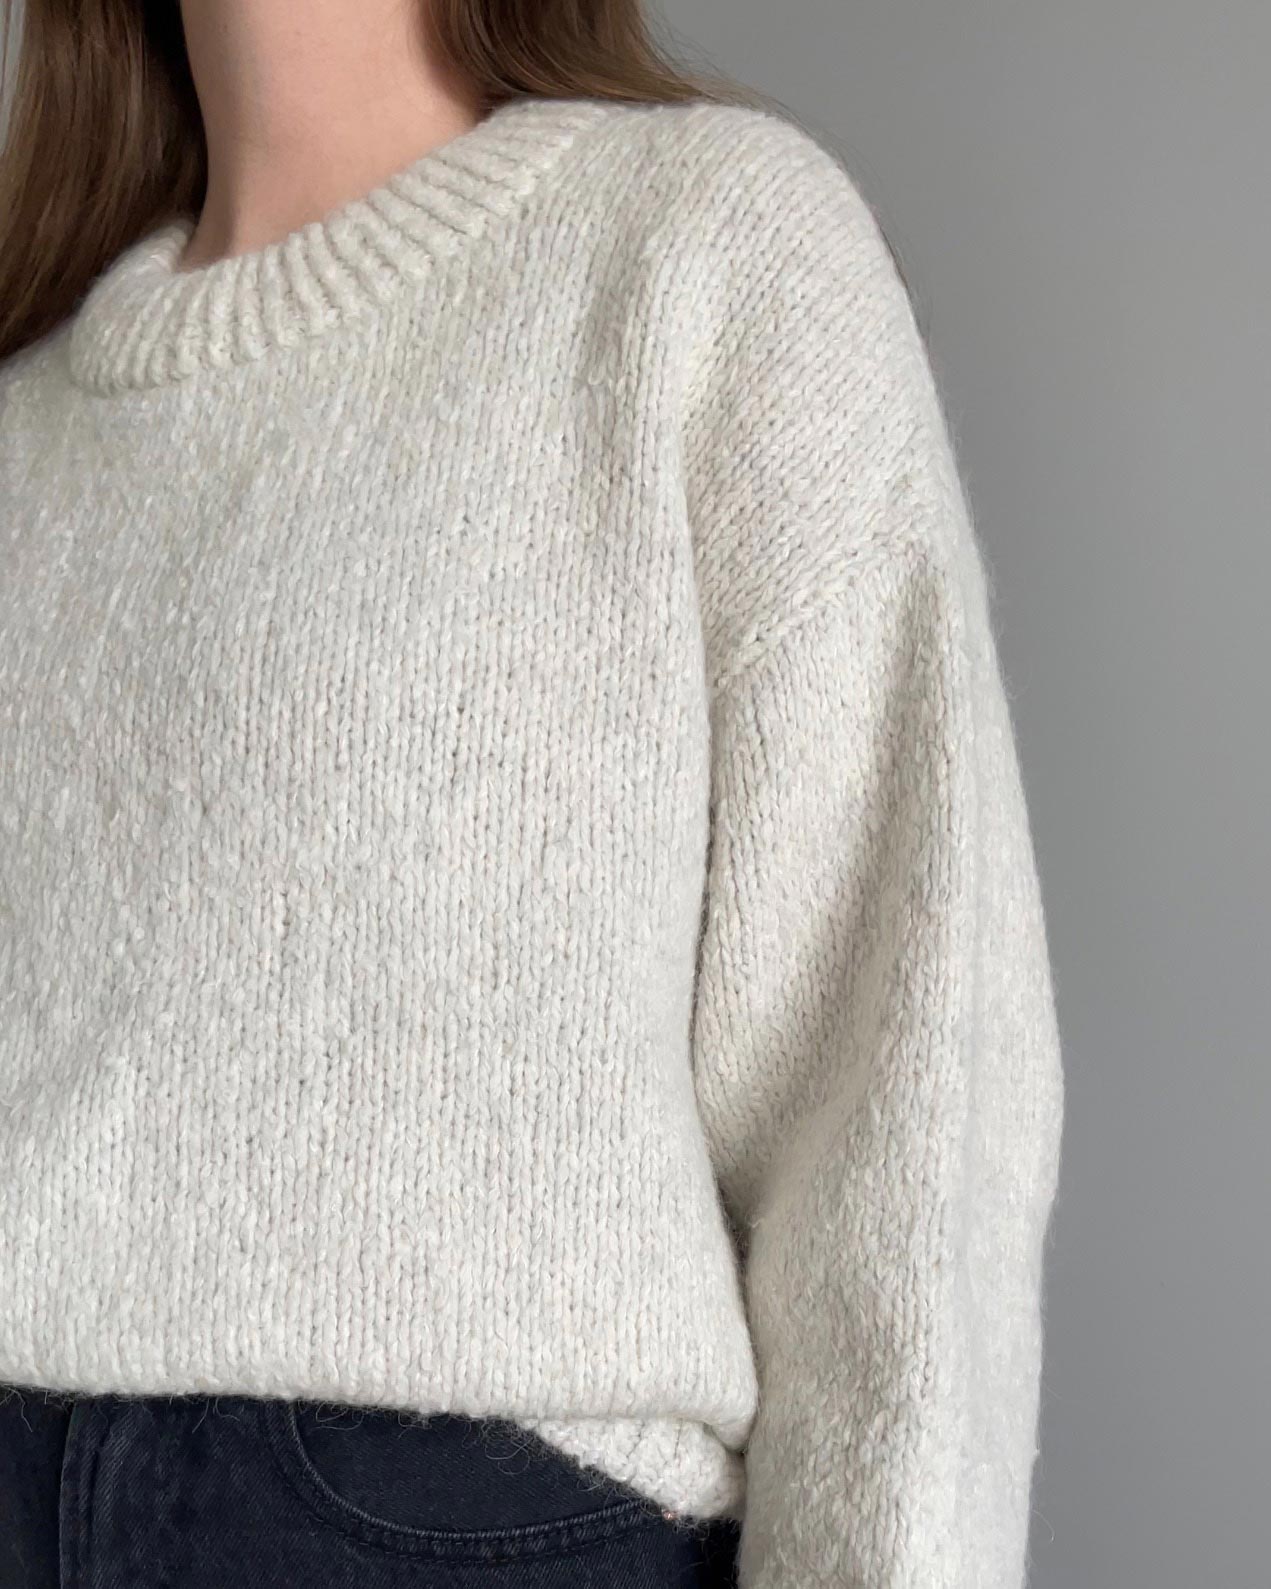 Buy knitting pdf pattern for Penny Sweater, using sloped bind-off, Italian bind-off, and provisional tubular cast-on techniques